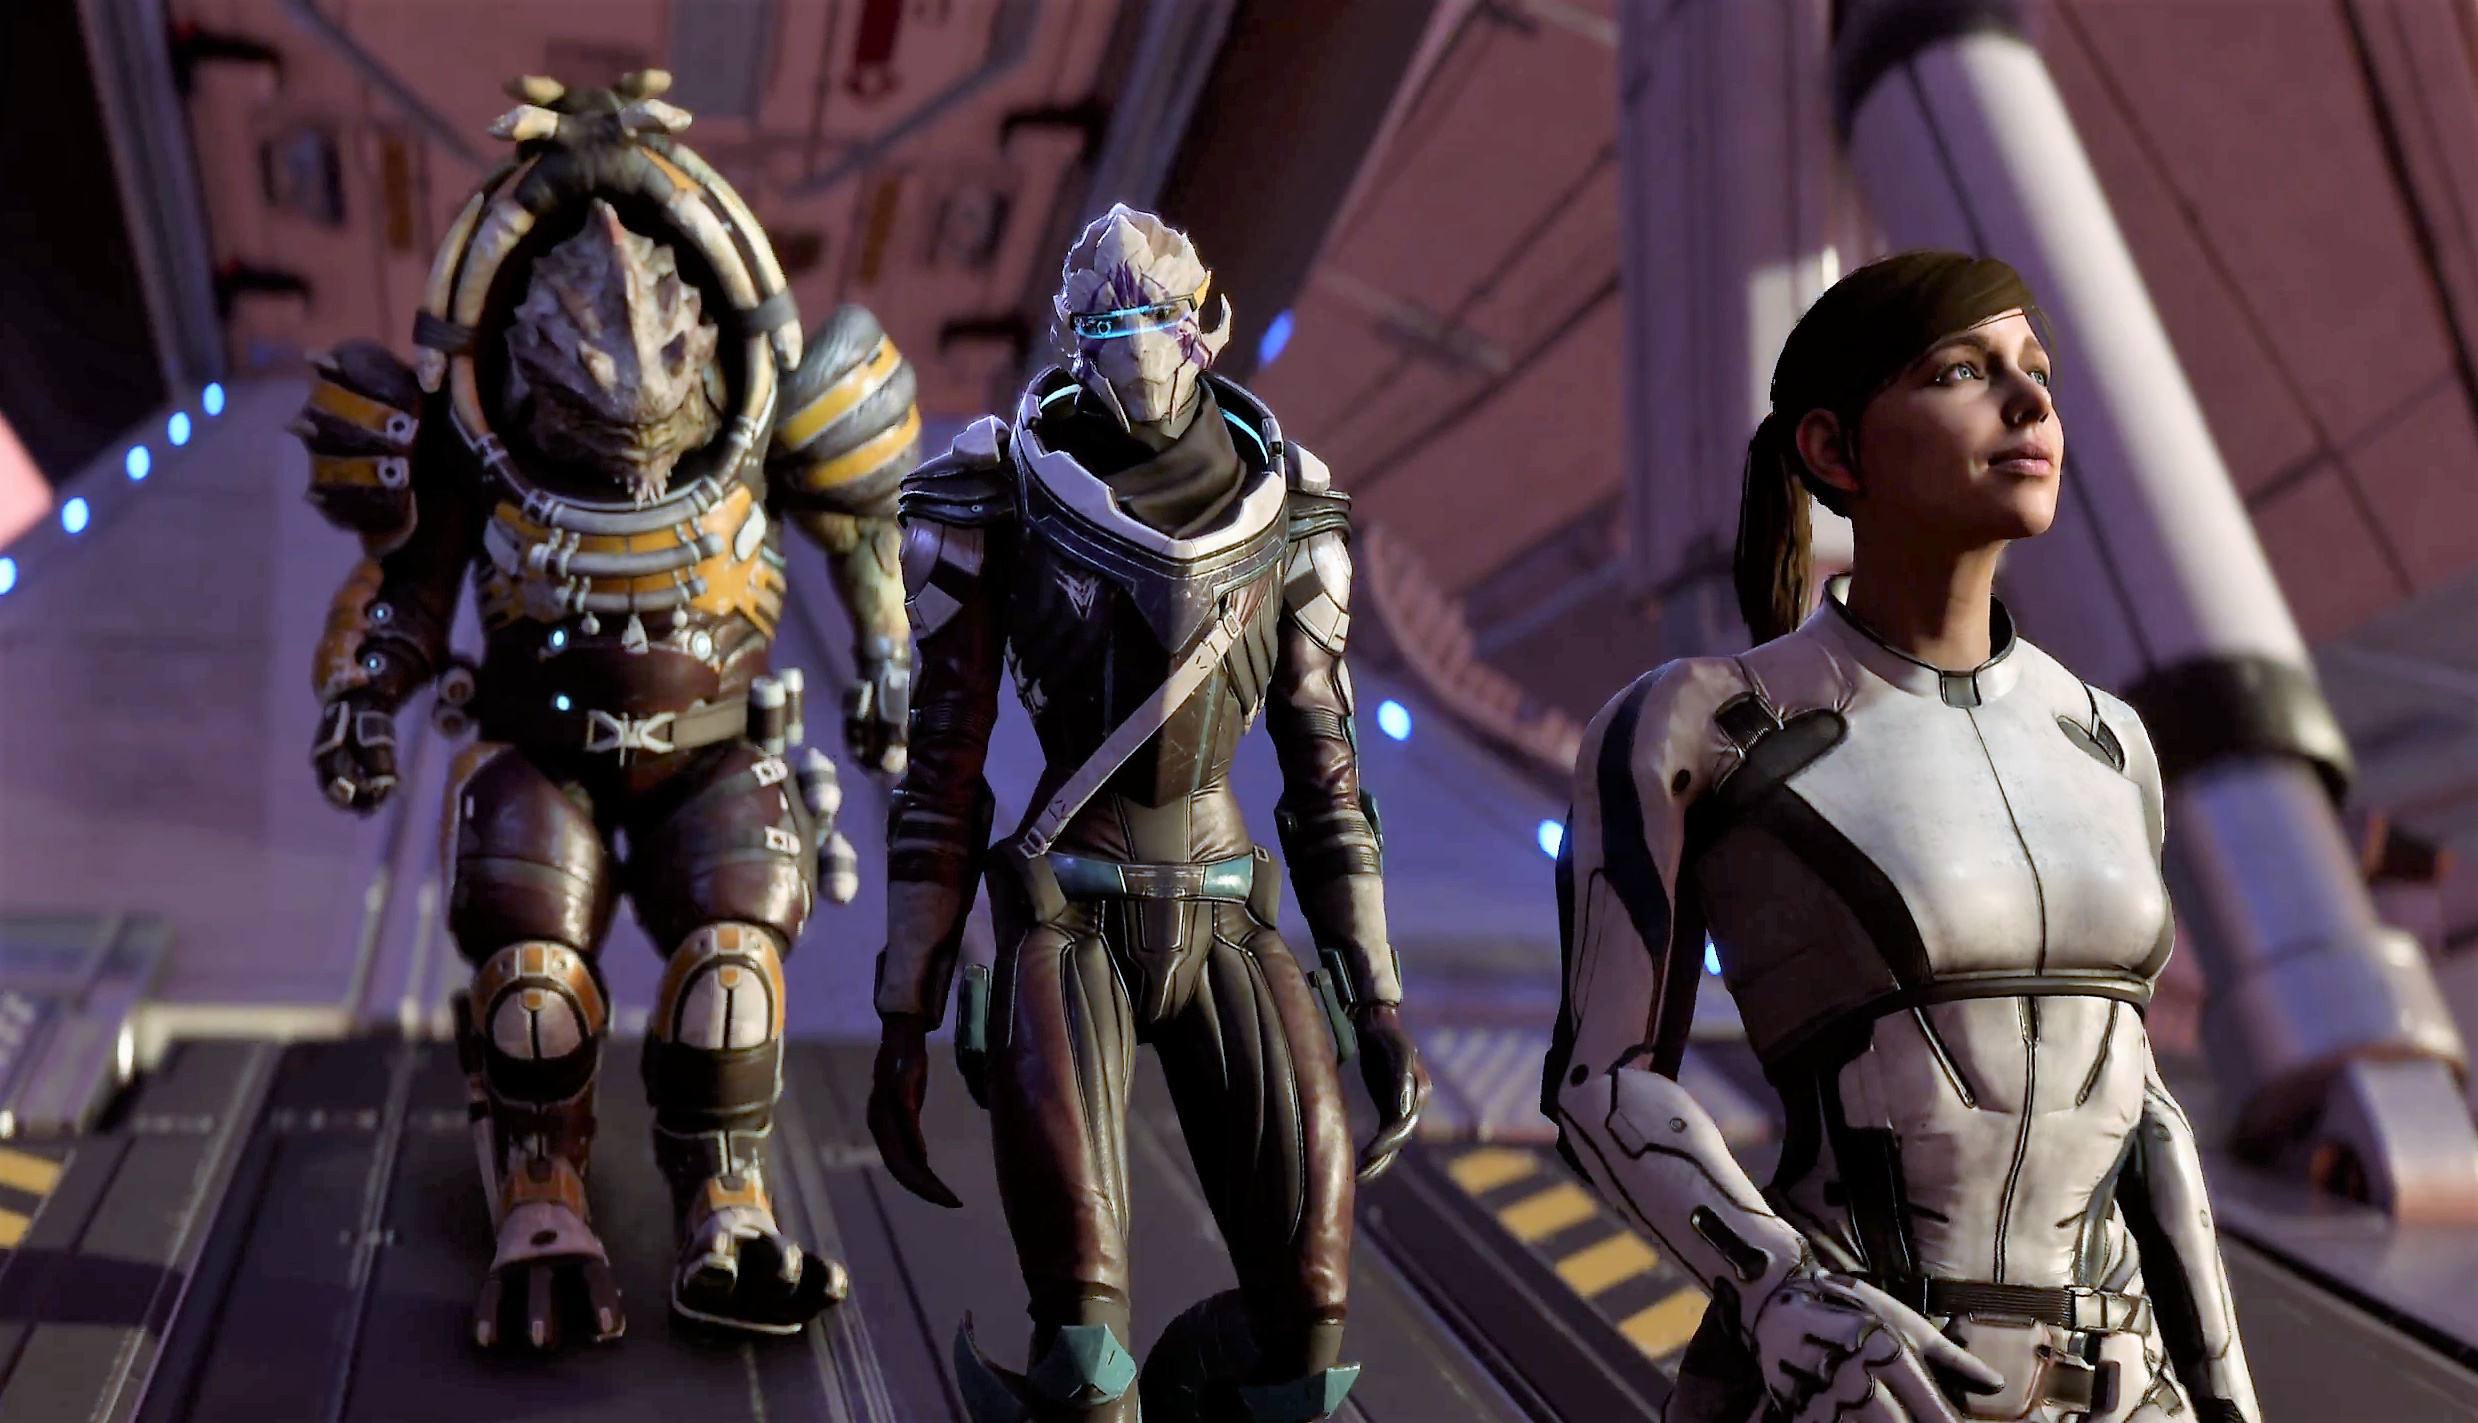 mass-effect-andromeda-has-a-crazy-amount-of-dialogue-push-square